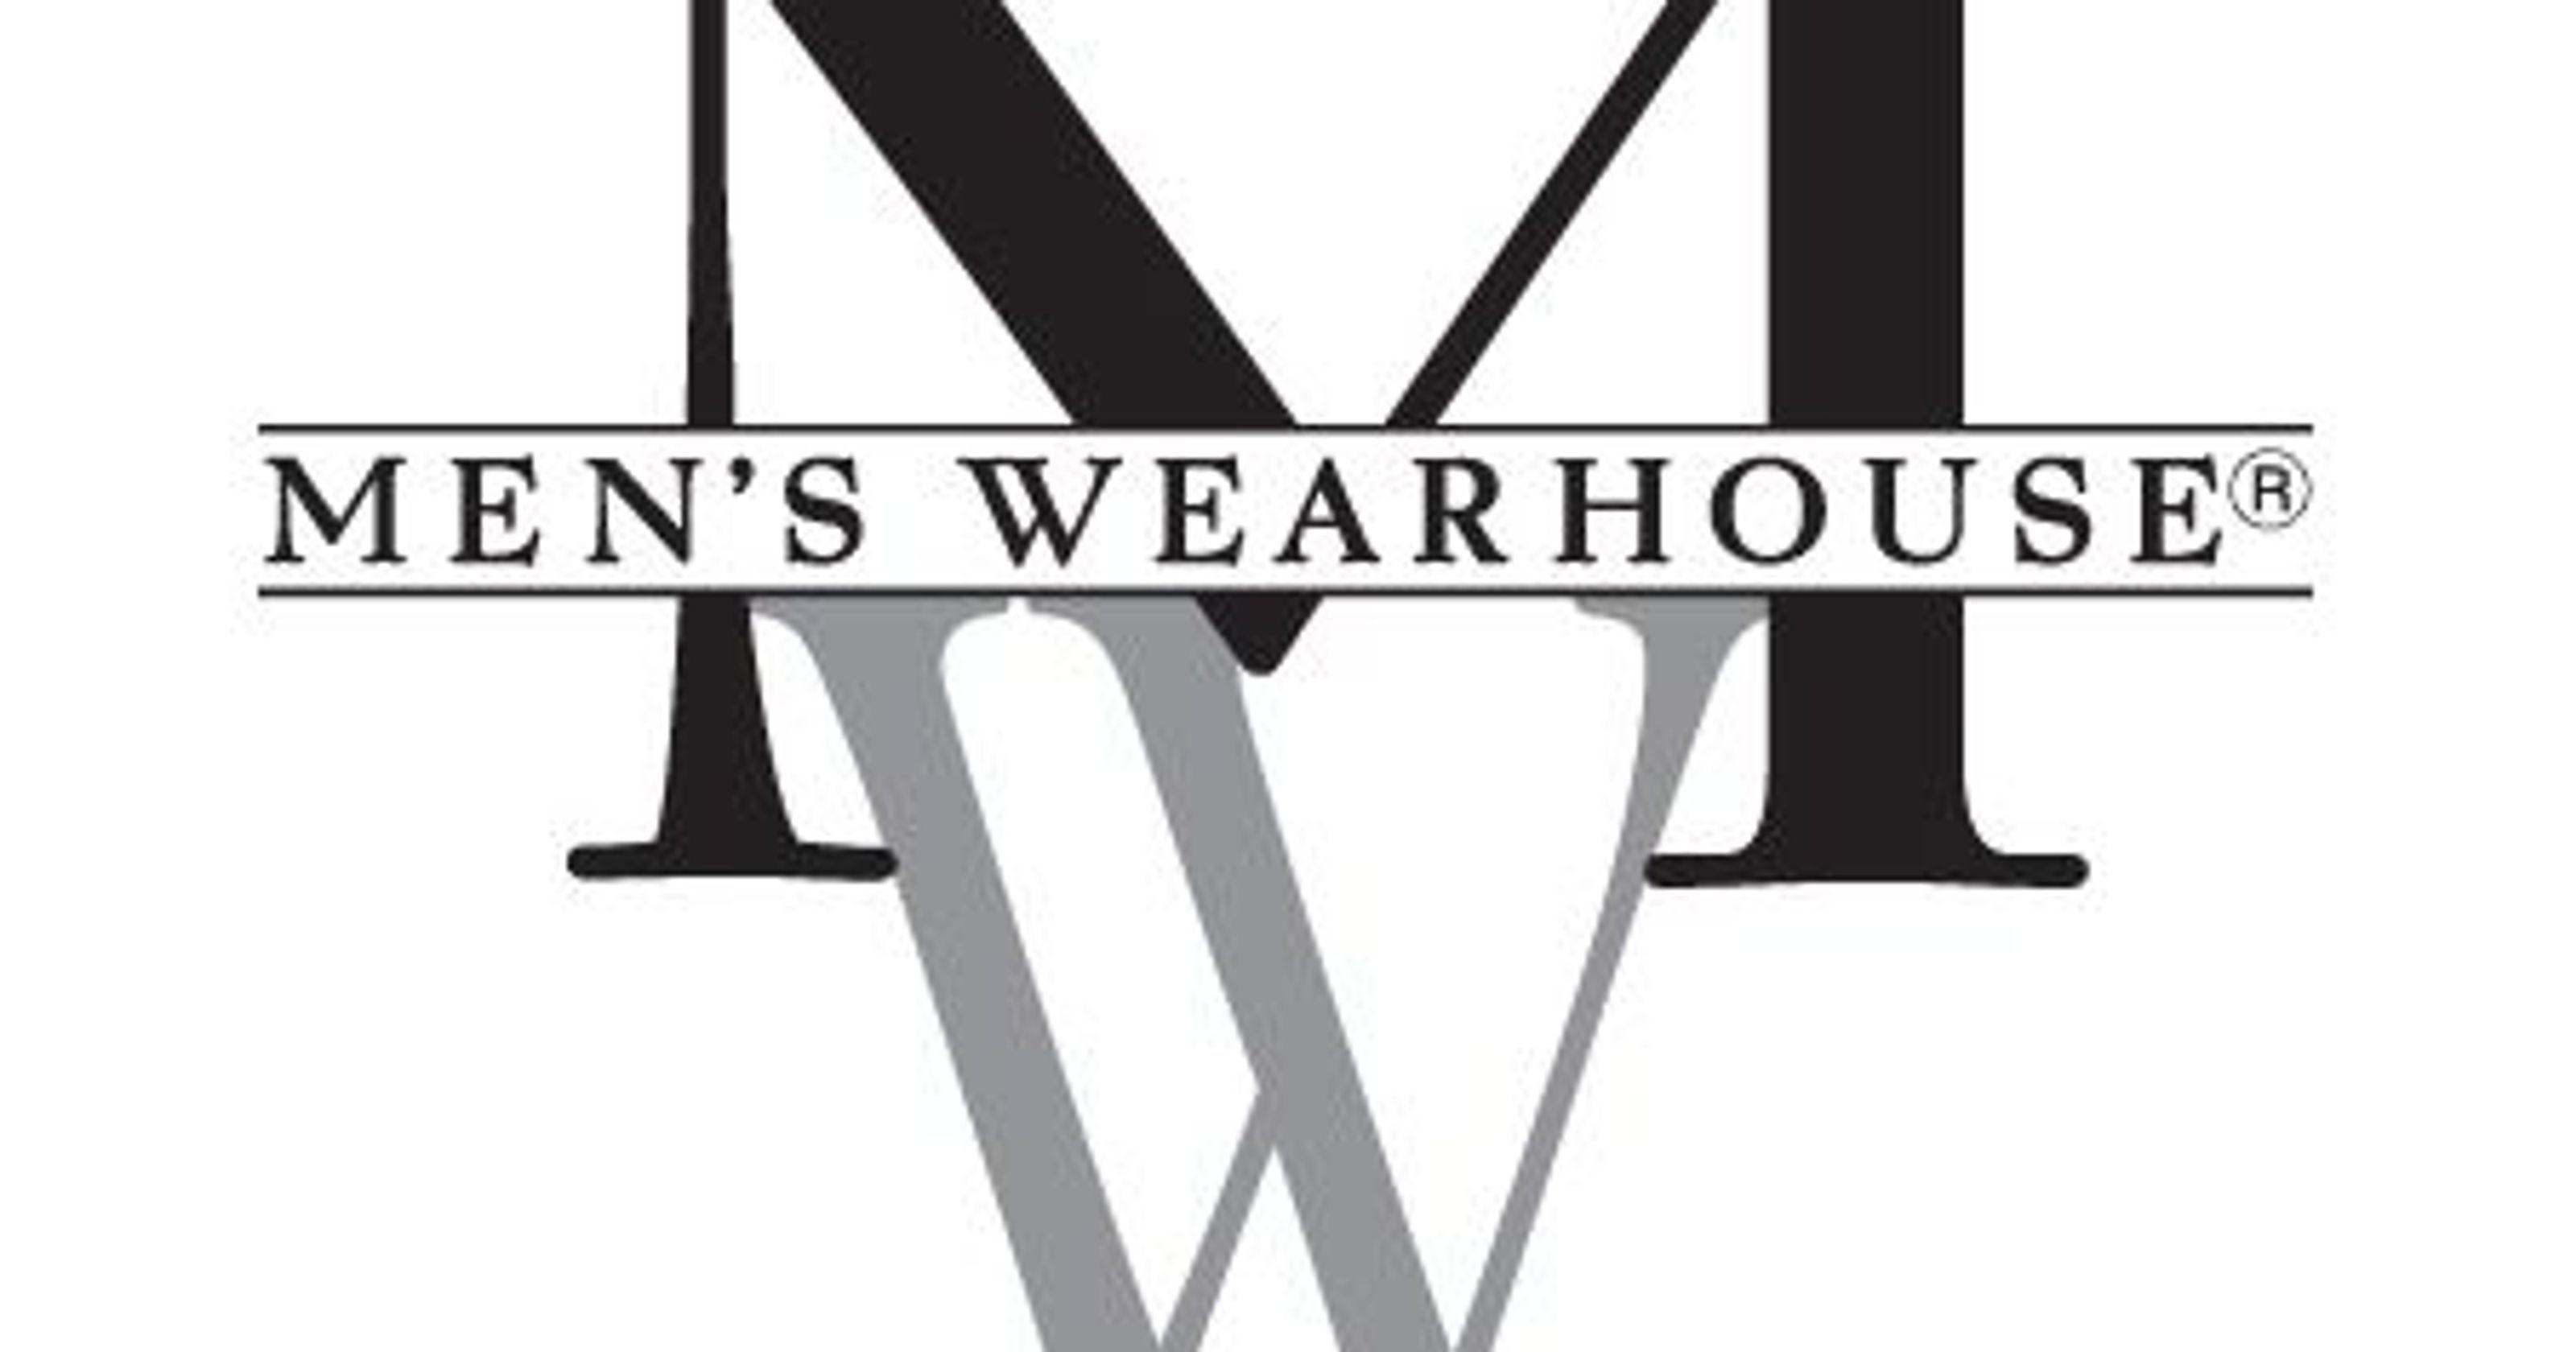 Men's Wearhouse Logo - Jos. A. Bank continues to be a drag on Men's Wearhouse sales, shares